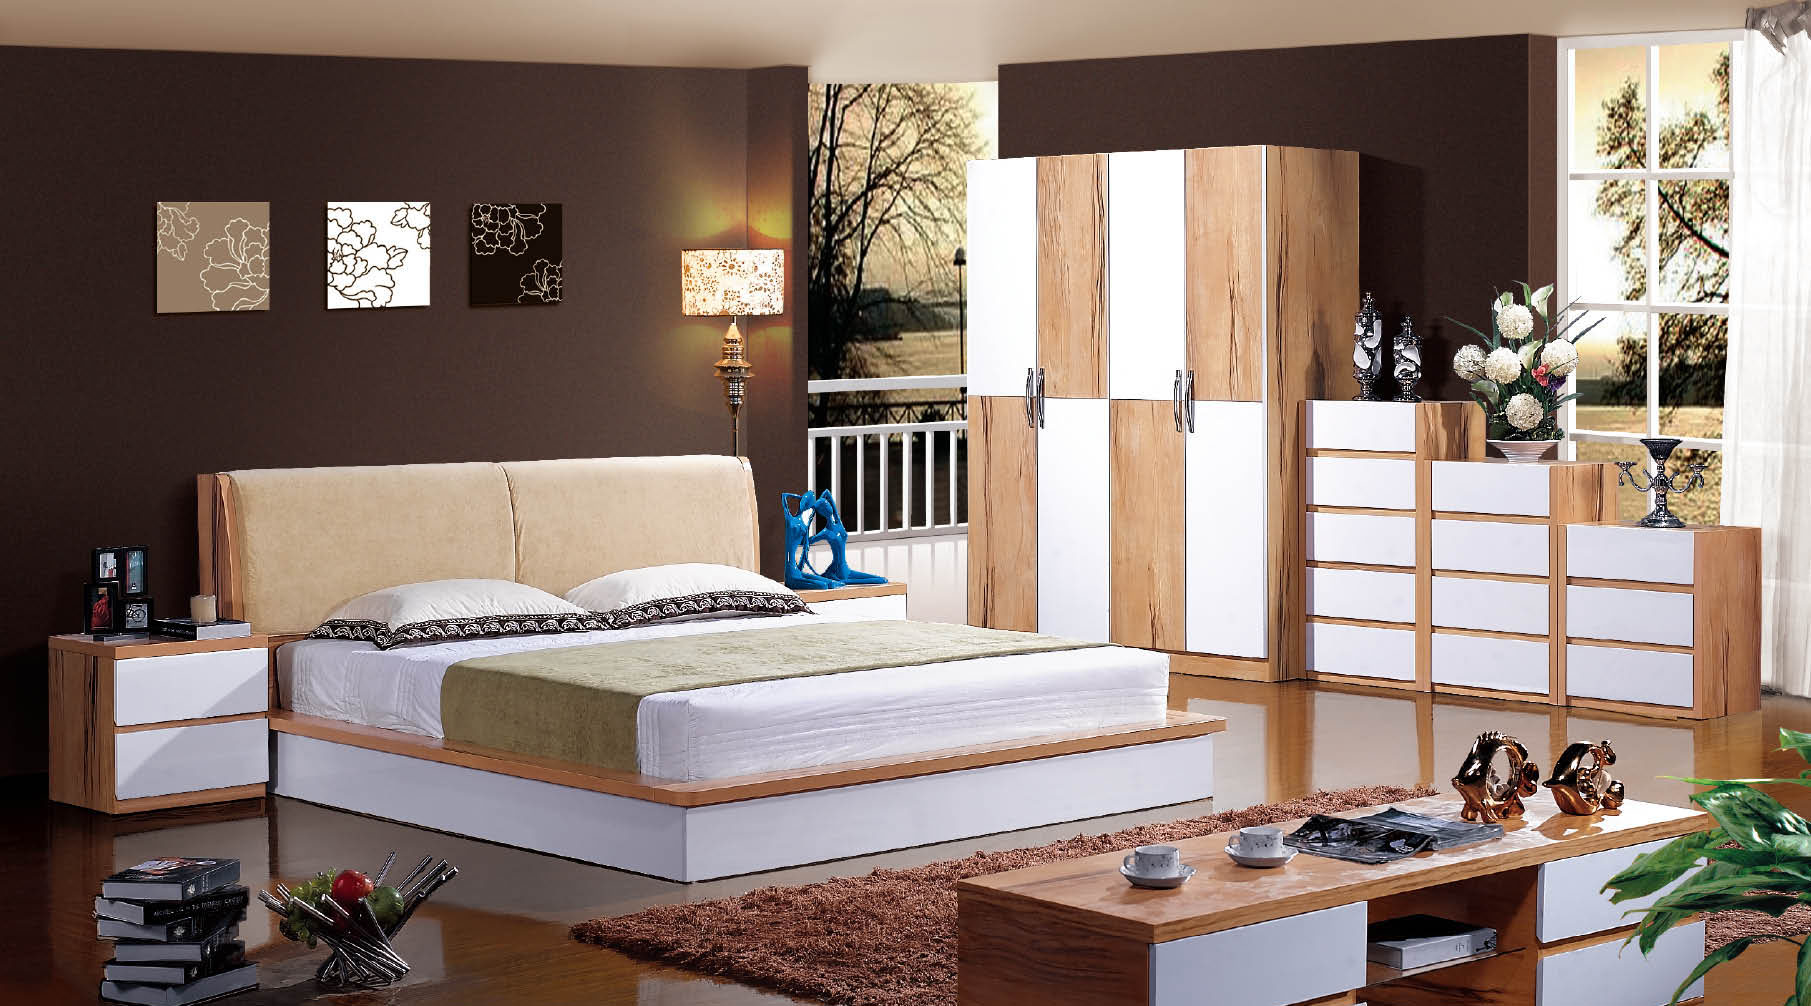 Luxury Hotel King Queen Size Bed Frame Modern Bedroom Furniture Leather Upholstered Double Bed UL-23WR1175